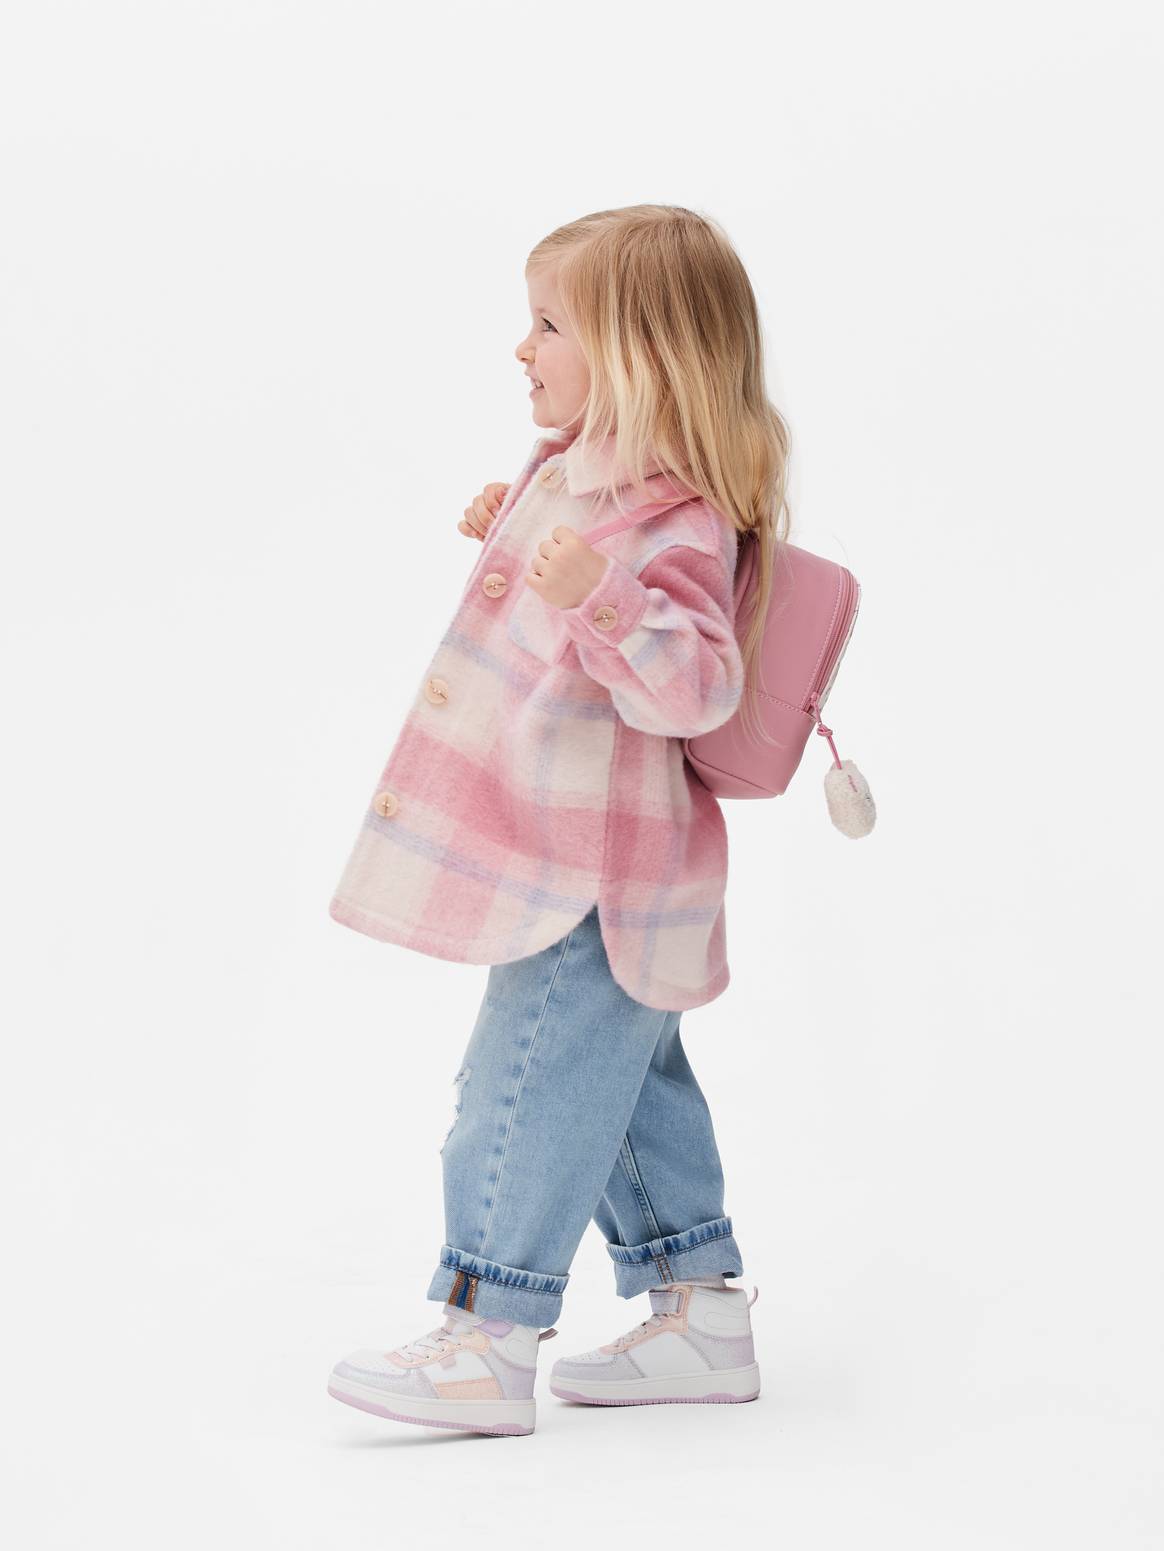 Primark children's clothing available from a click-and-collect trial